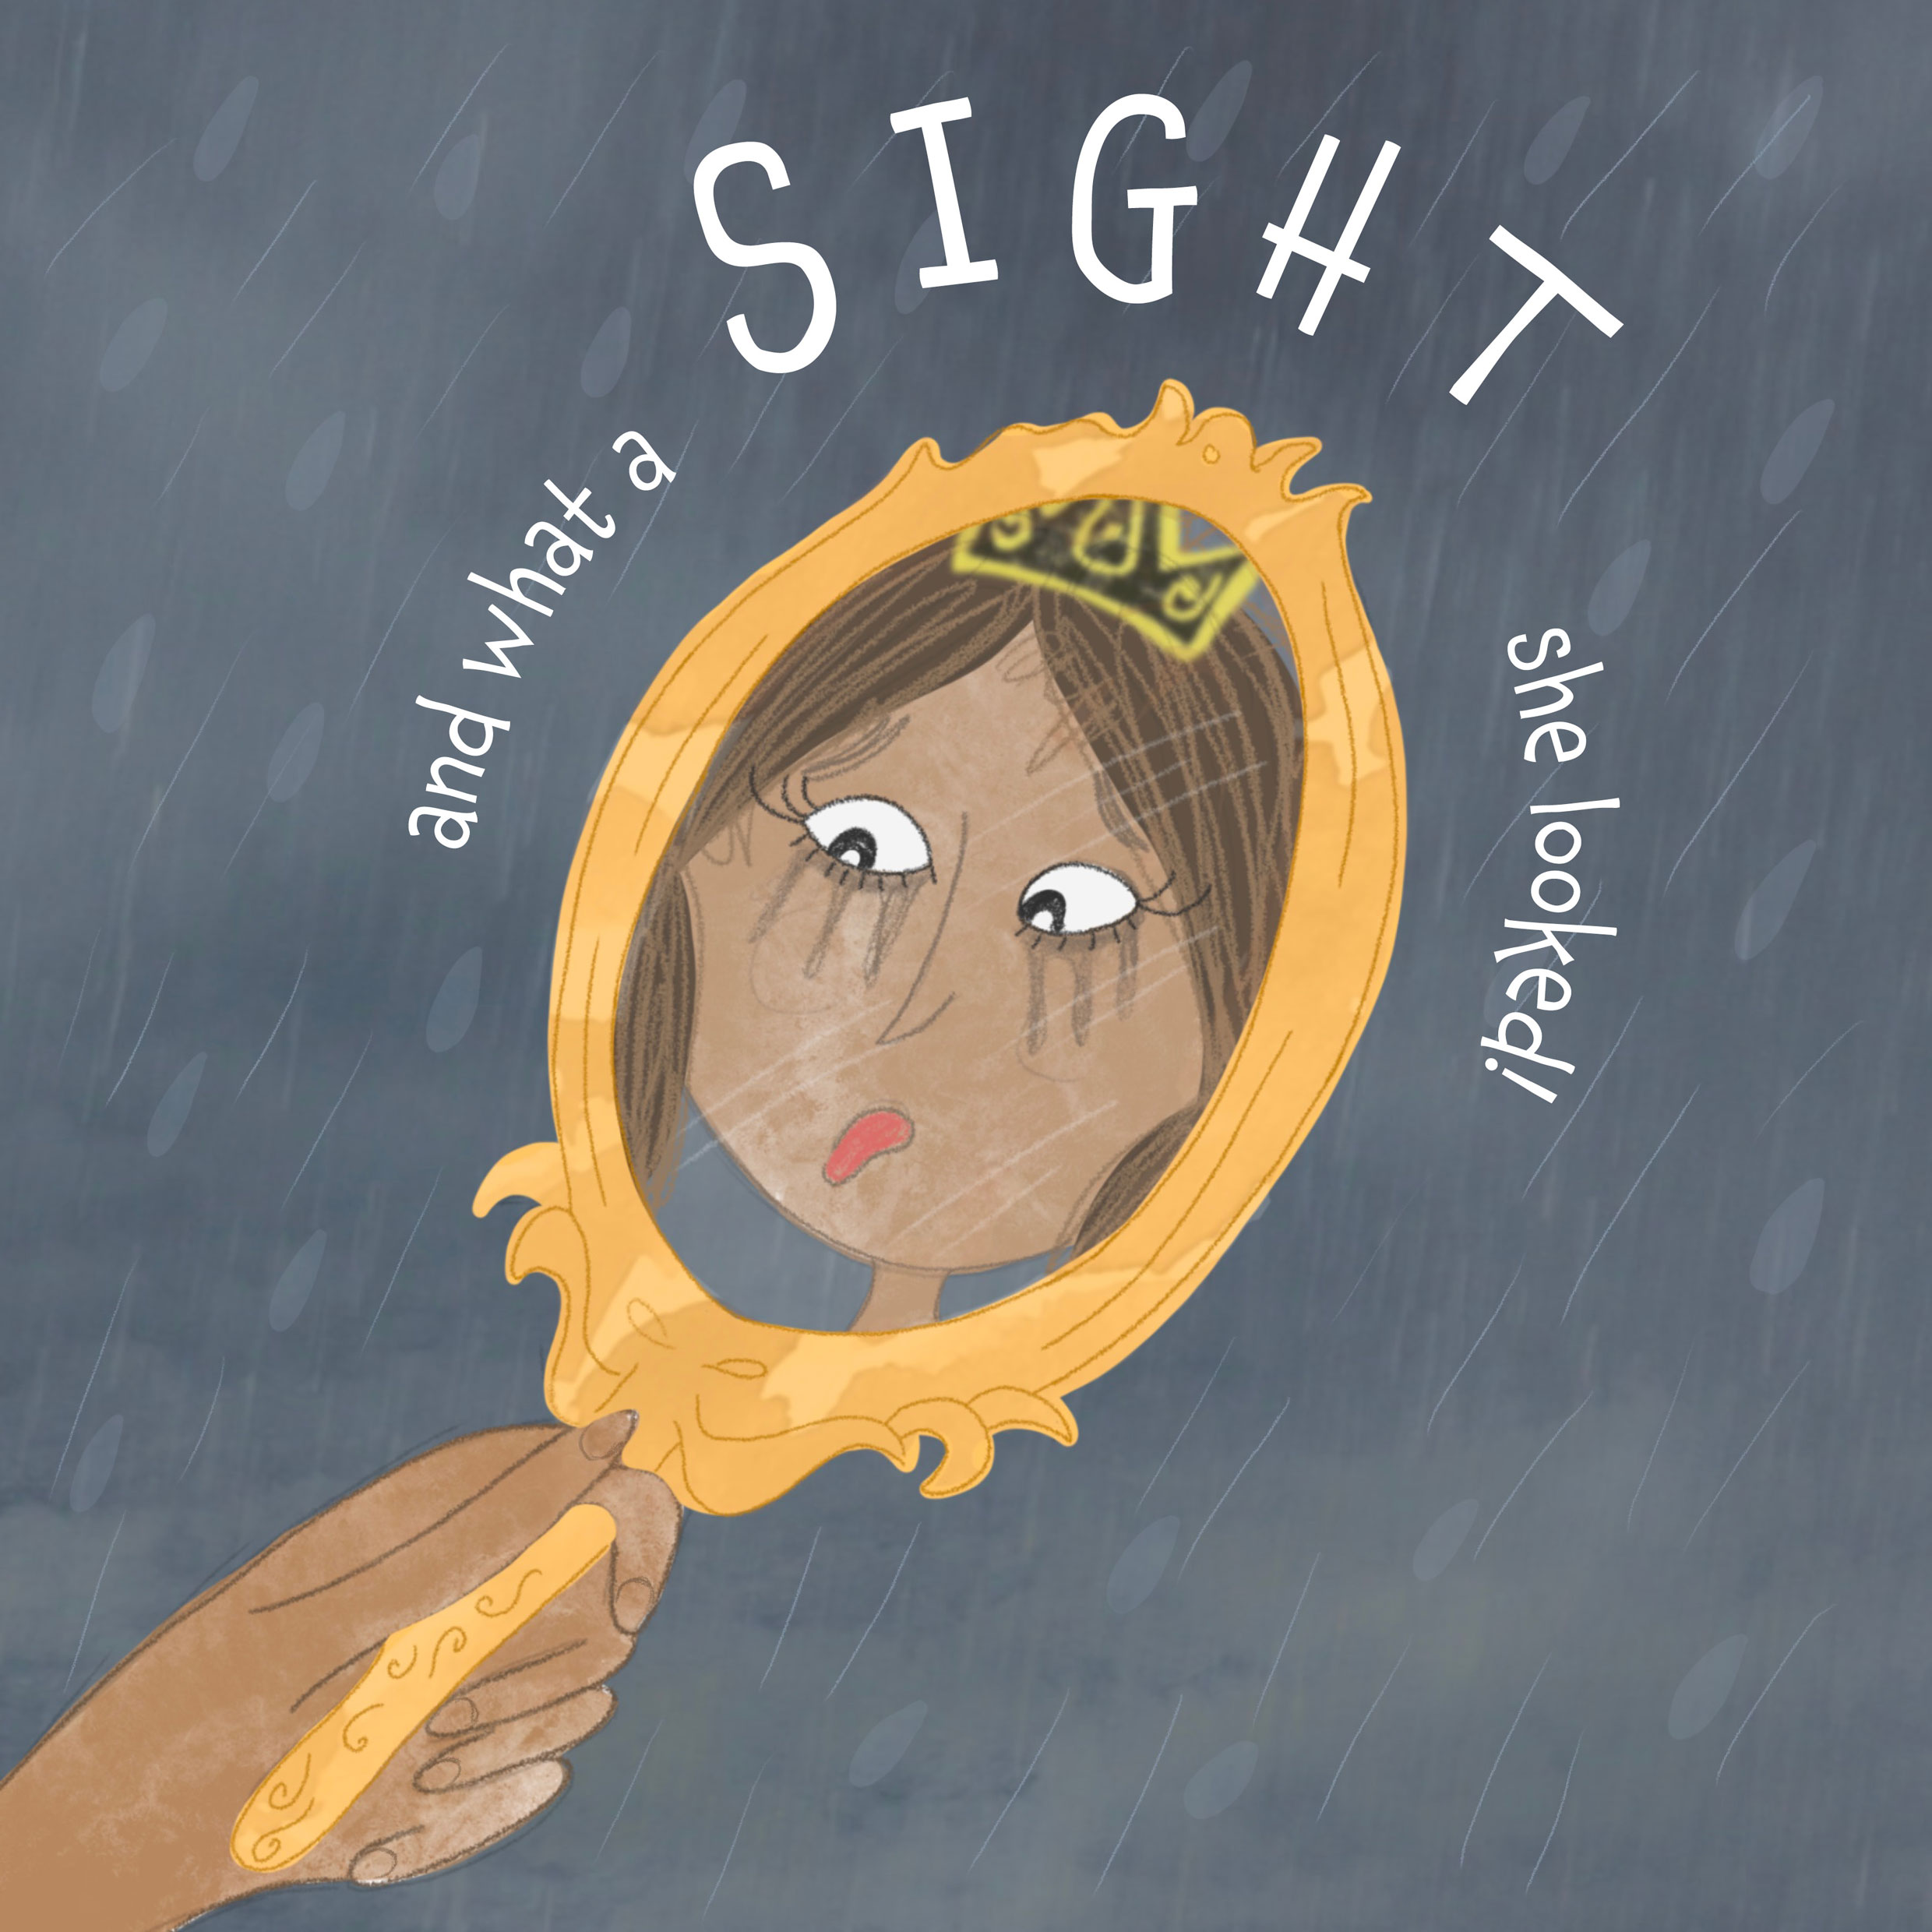 Redesign of 'The Princess and the Pea' fairy tale. Illustration by Catie McFarland showing a girl looking in a mirror after a storm.